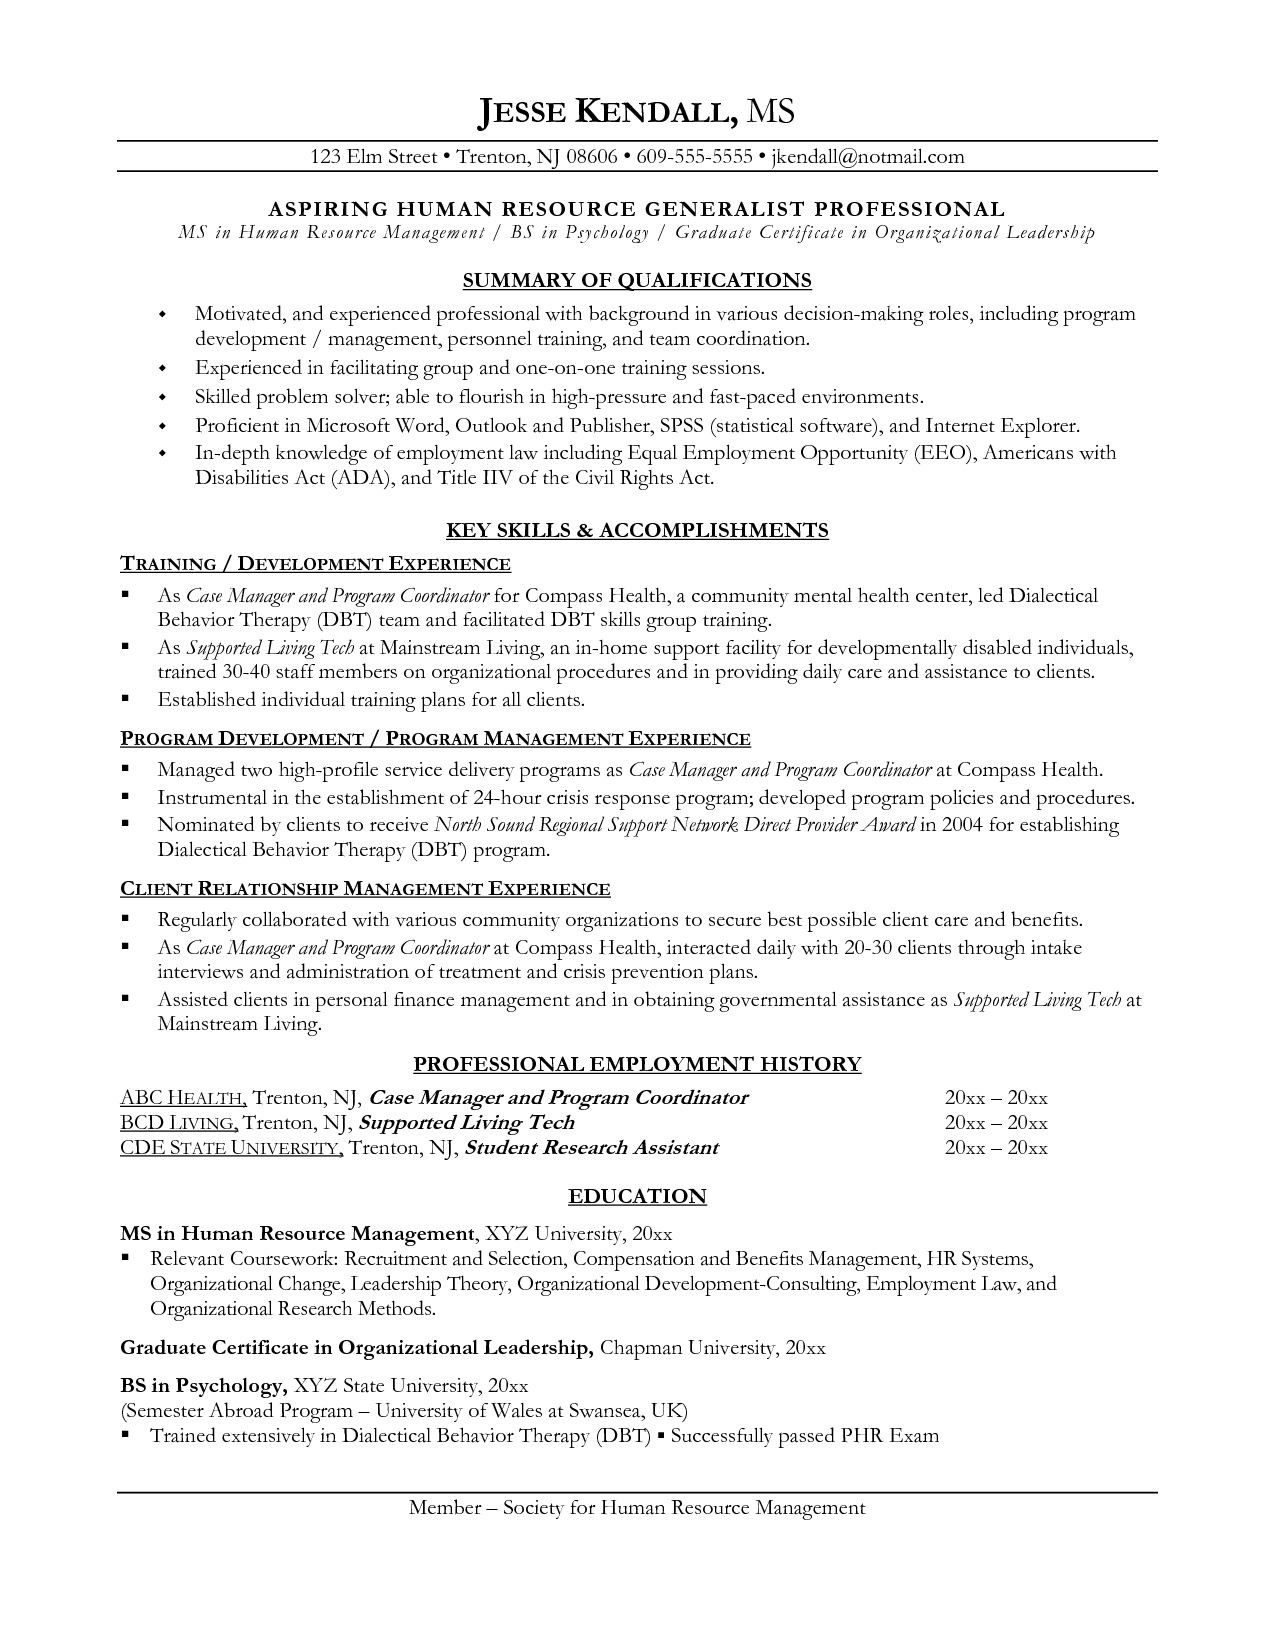 Sample Resume for Career Change to Human Resources Resume-examples.me -&nbspthis Website is for Sale! -&nbspresume …